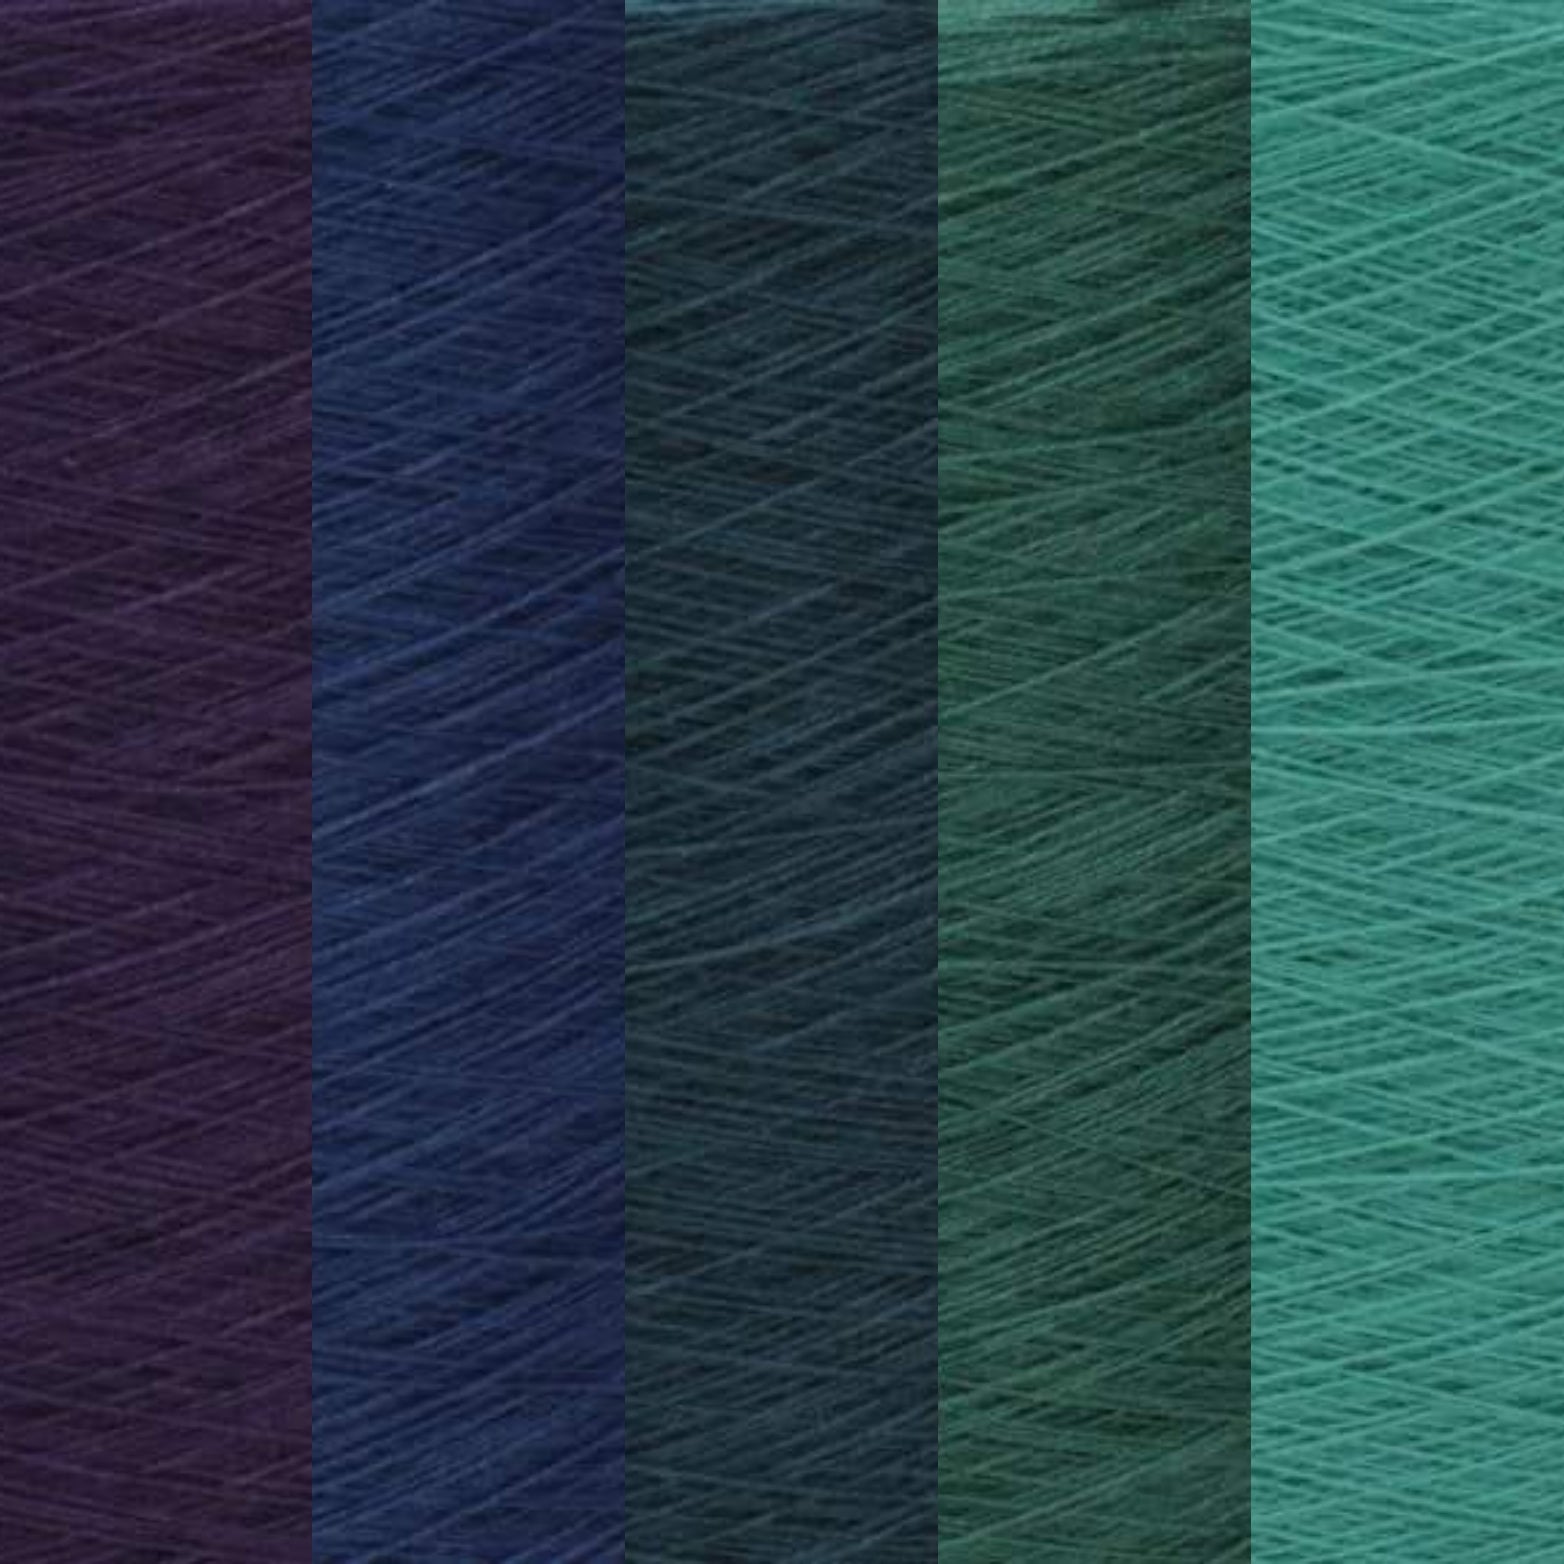 Gradient yarn cake, colour combination M019 – Blooming Yarns by KW